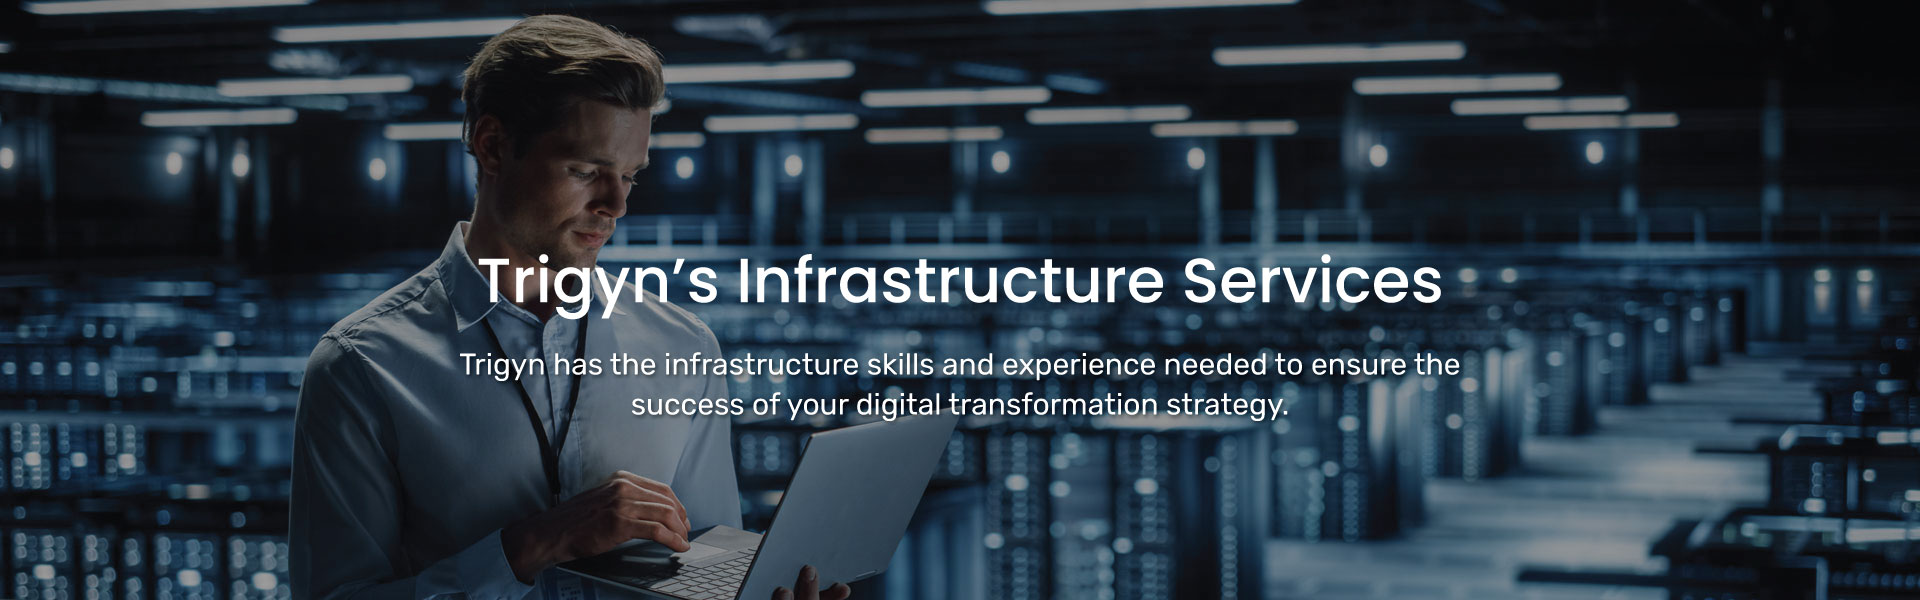 Trigyn's Infrastructure Services